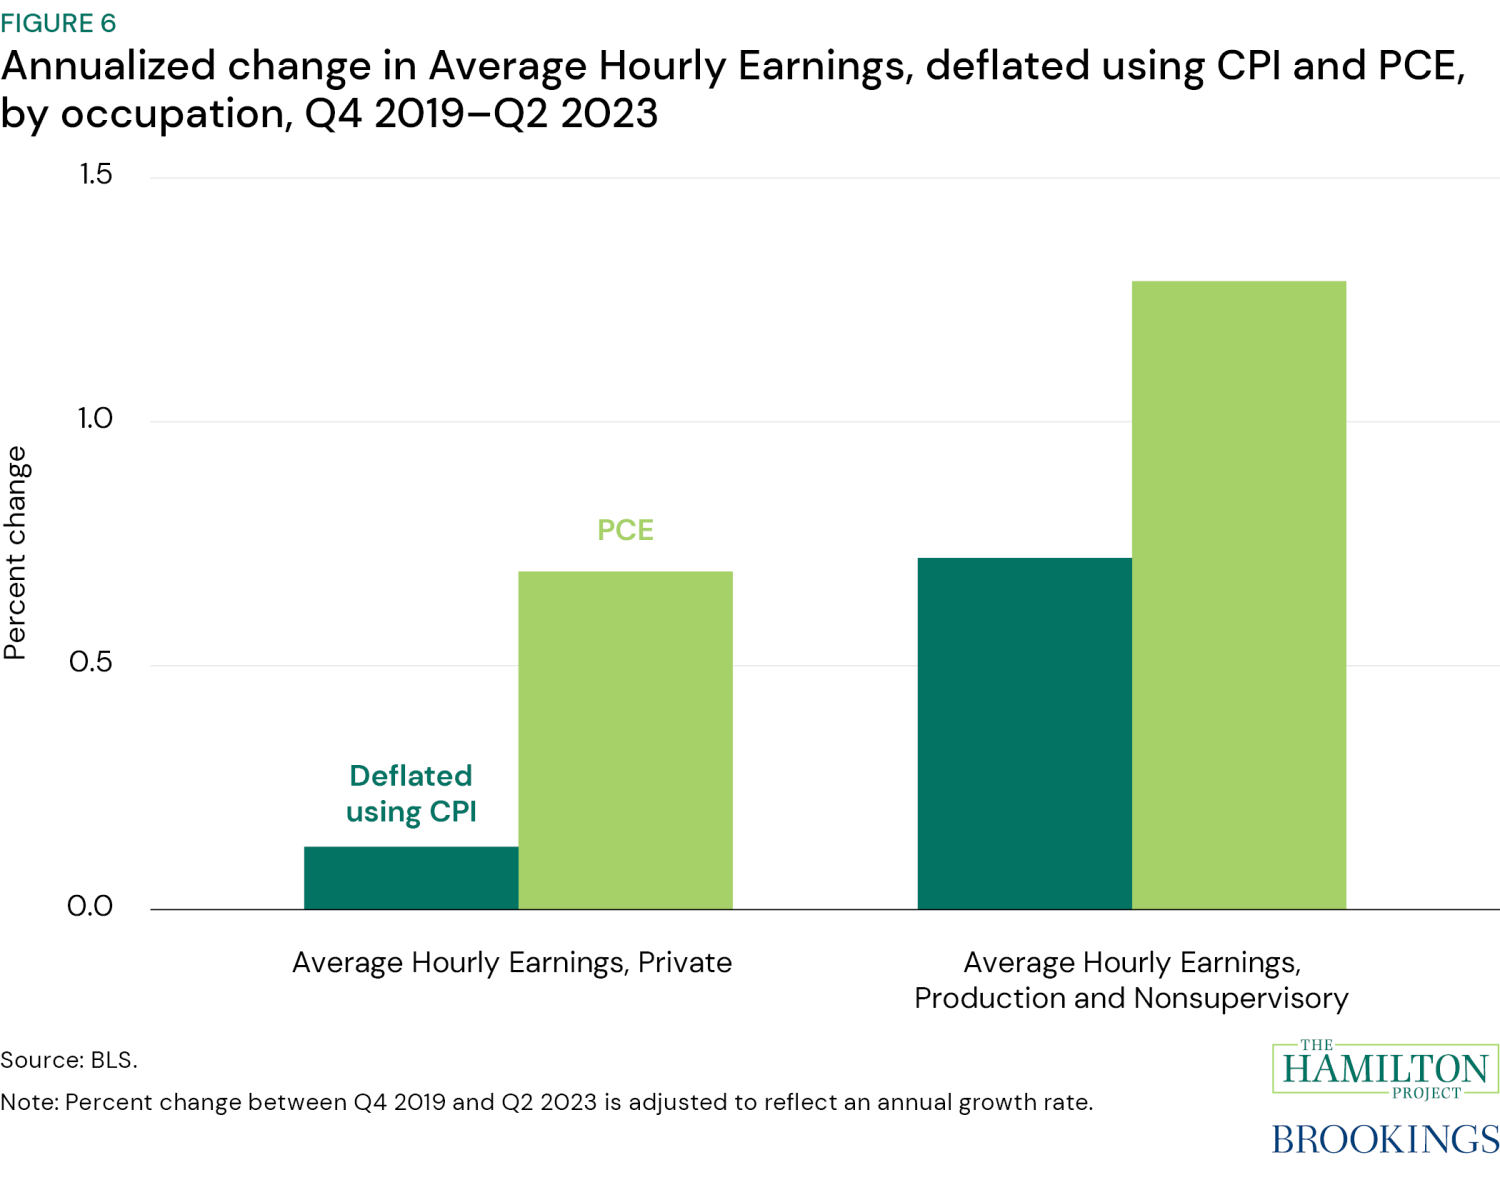 Figure 6: Annualized change in average hourly earnings, deflated using CPI and PCE, by occupation, Q4 2019 - Q2 2023